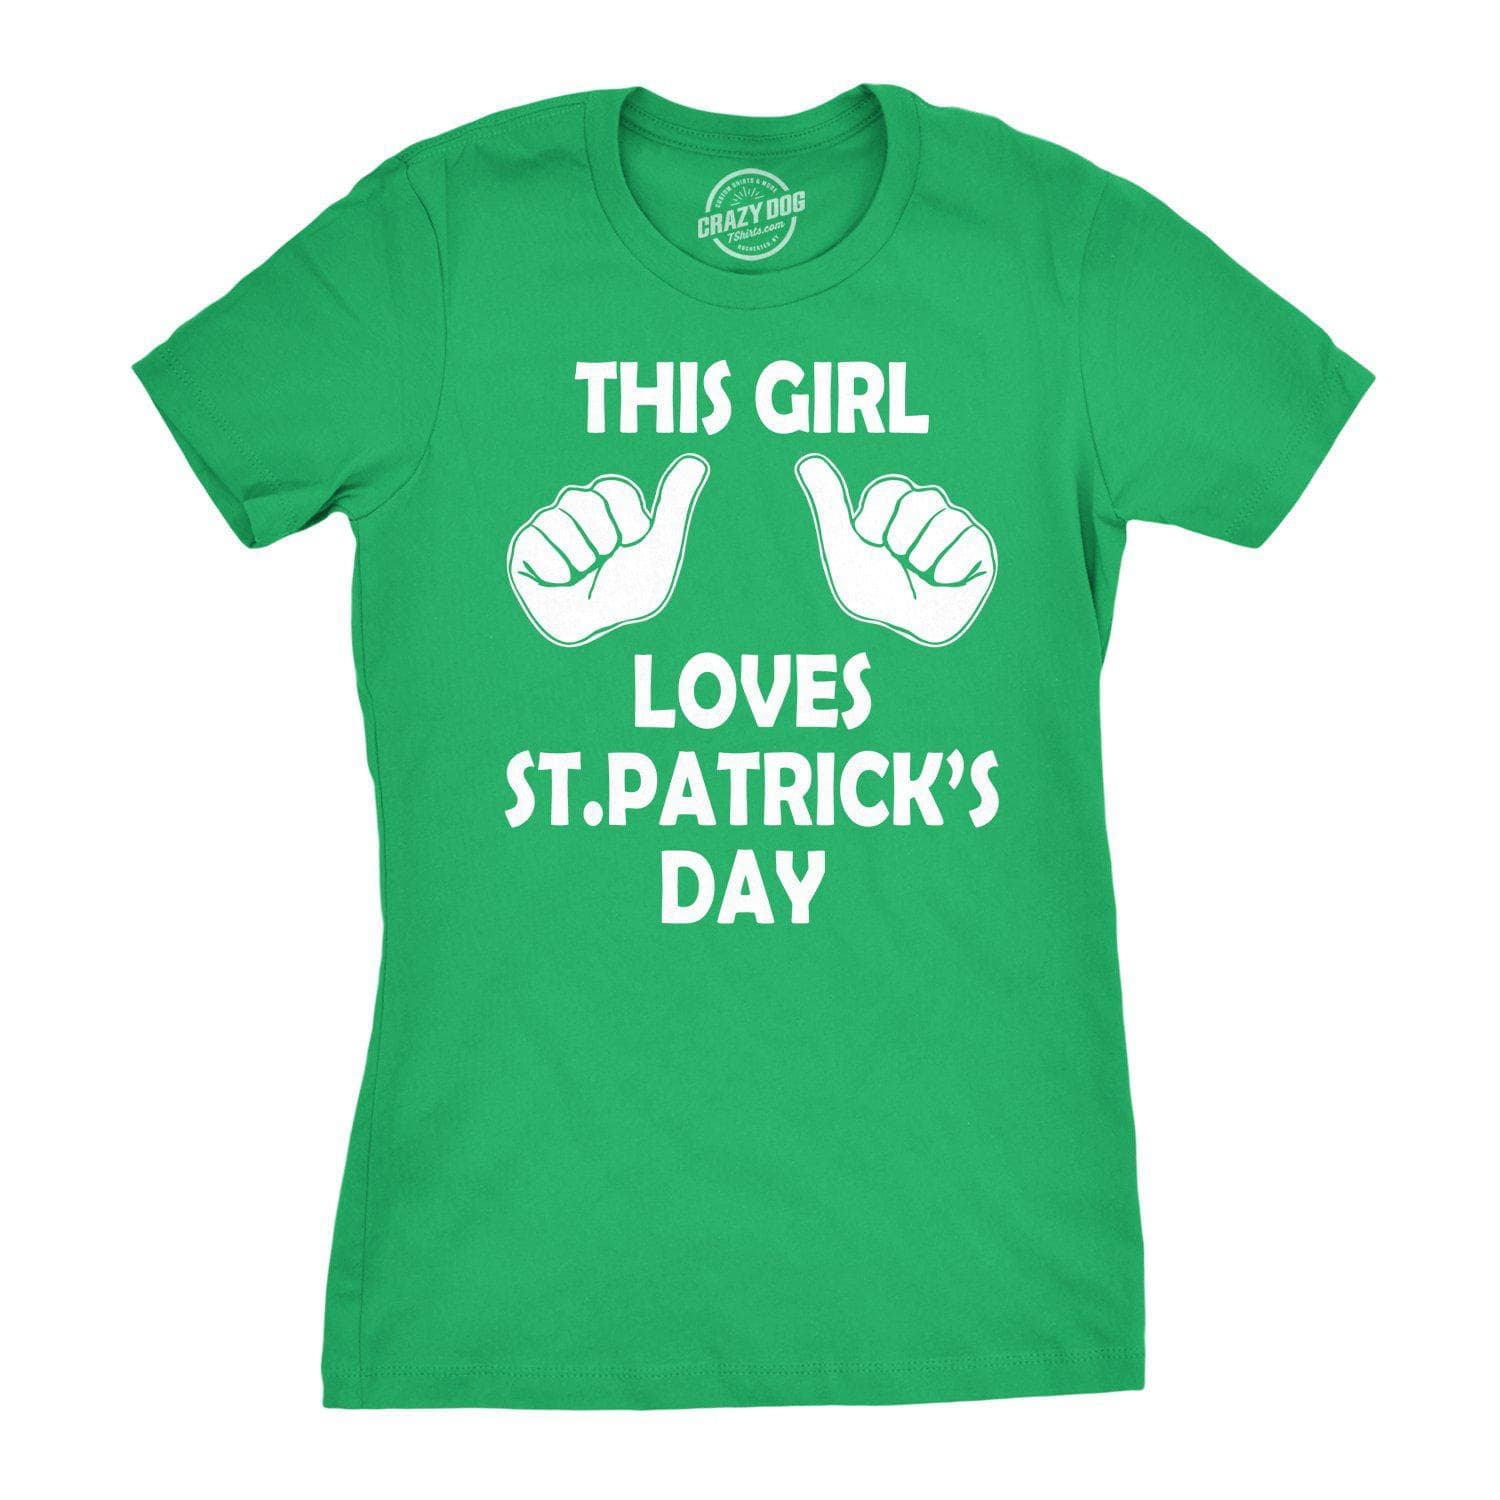 This Girl Loves St. Patrick's Day Women's Tshirt  -  Crazy Dog T-Shirts